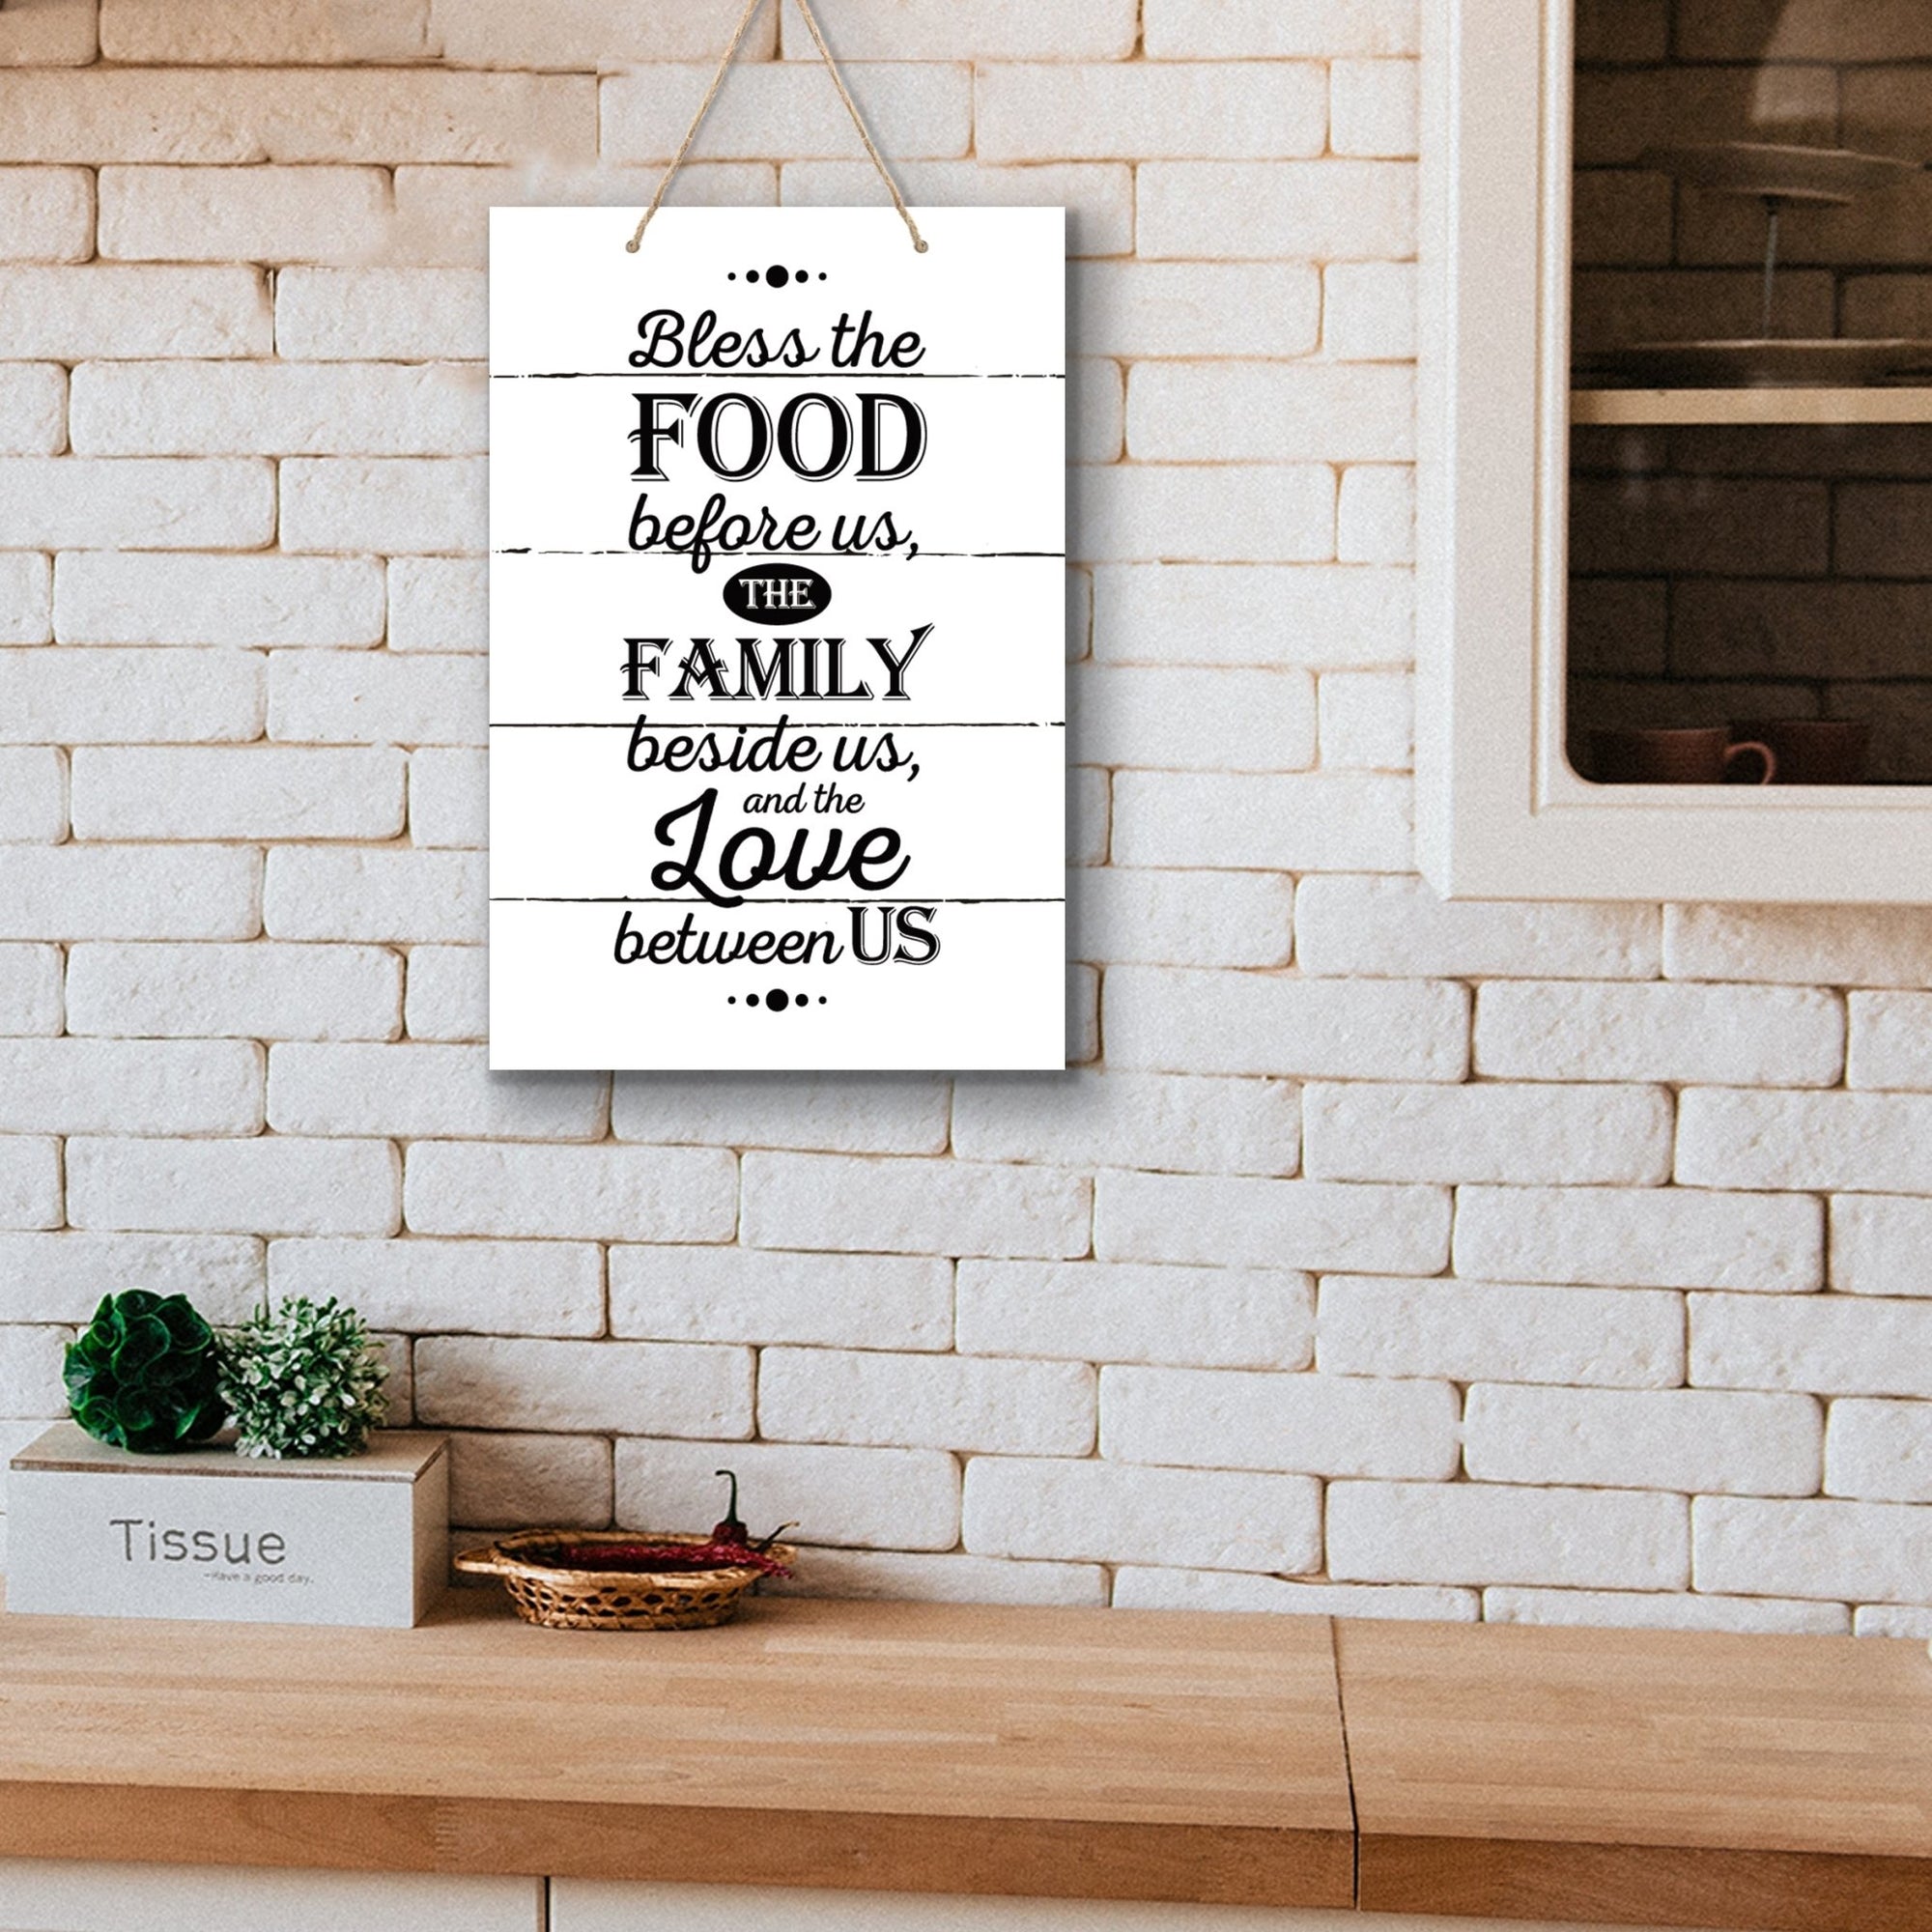 Inspirational Wooden Rustic Wall Hanging Rope Sign Kitchen Home Décor - Bless The Food - LifeSong Milestones